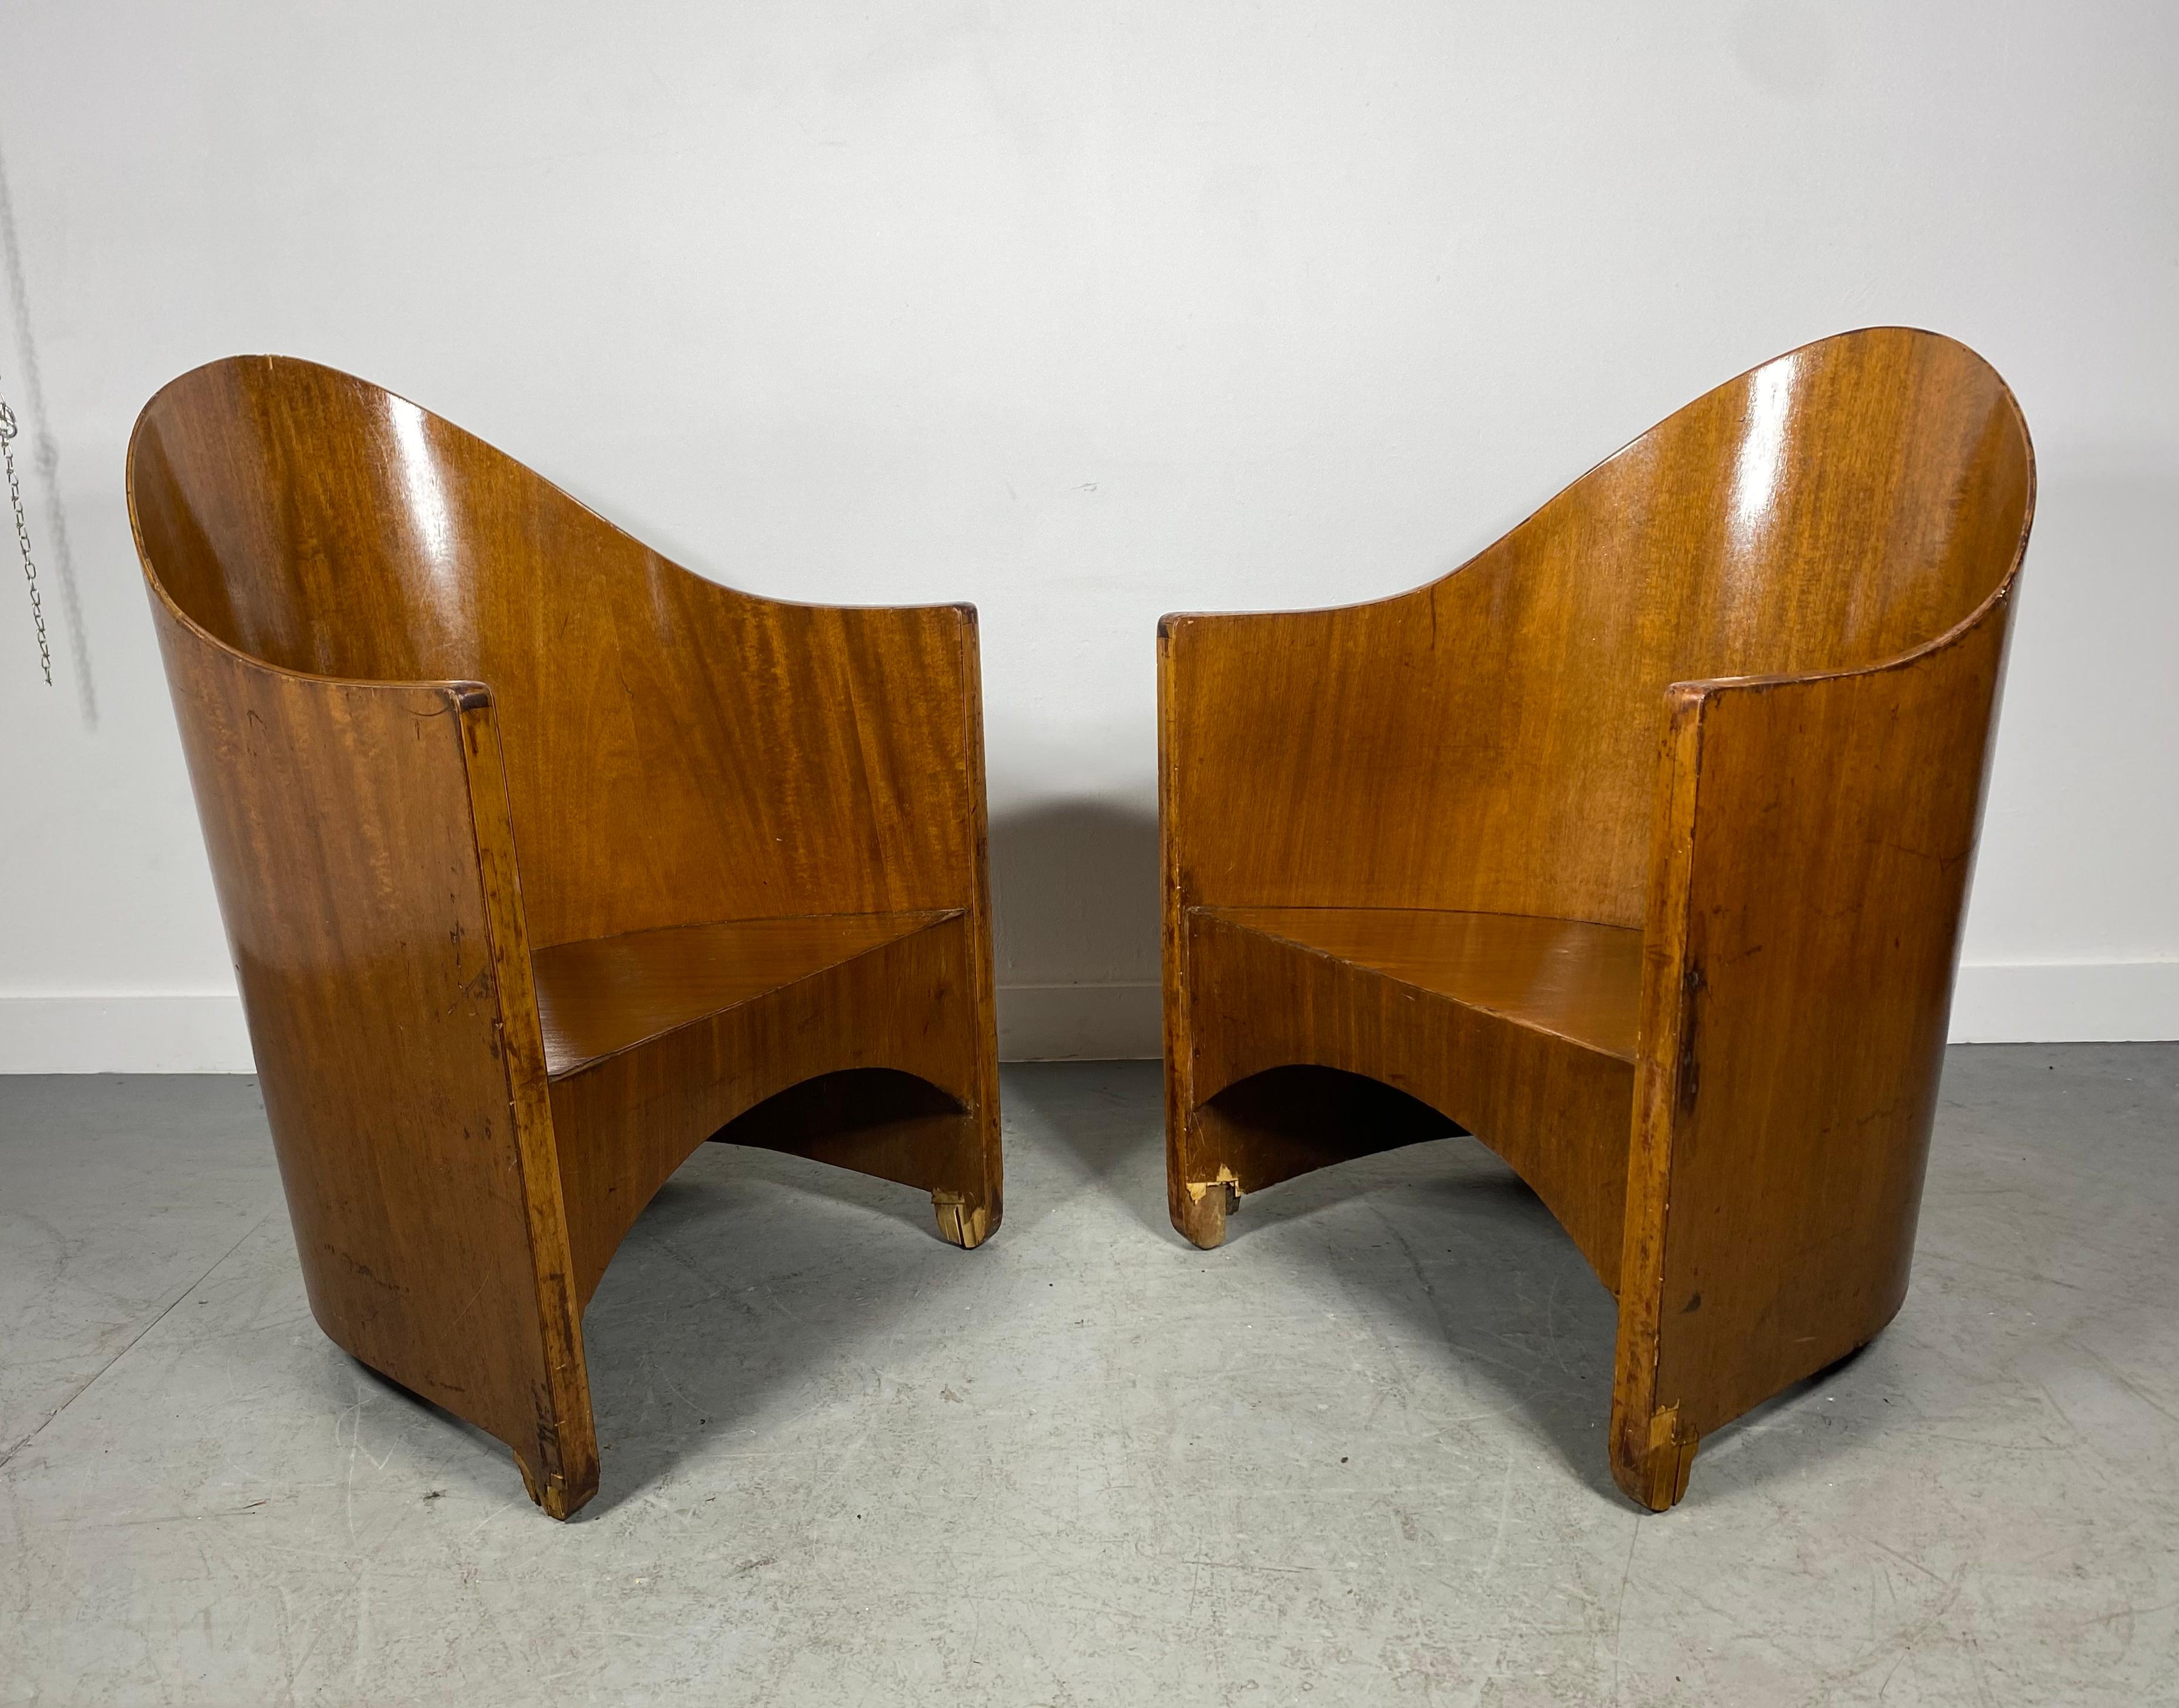 Extremely Rare Pair Modernist Arm Chairs designed by Walter von Nessen , circa 1929. Chairs retain they're original color, finish, patina, In need of restoration, mainly feet ,(veneer)..From my bit of research,,it appears this was a common problem,